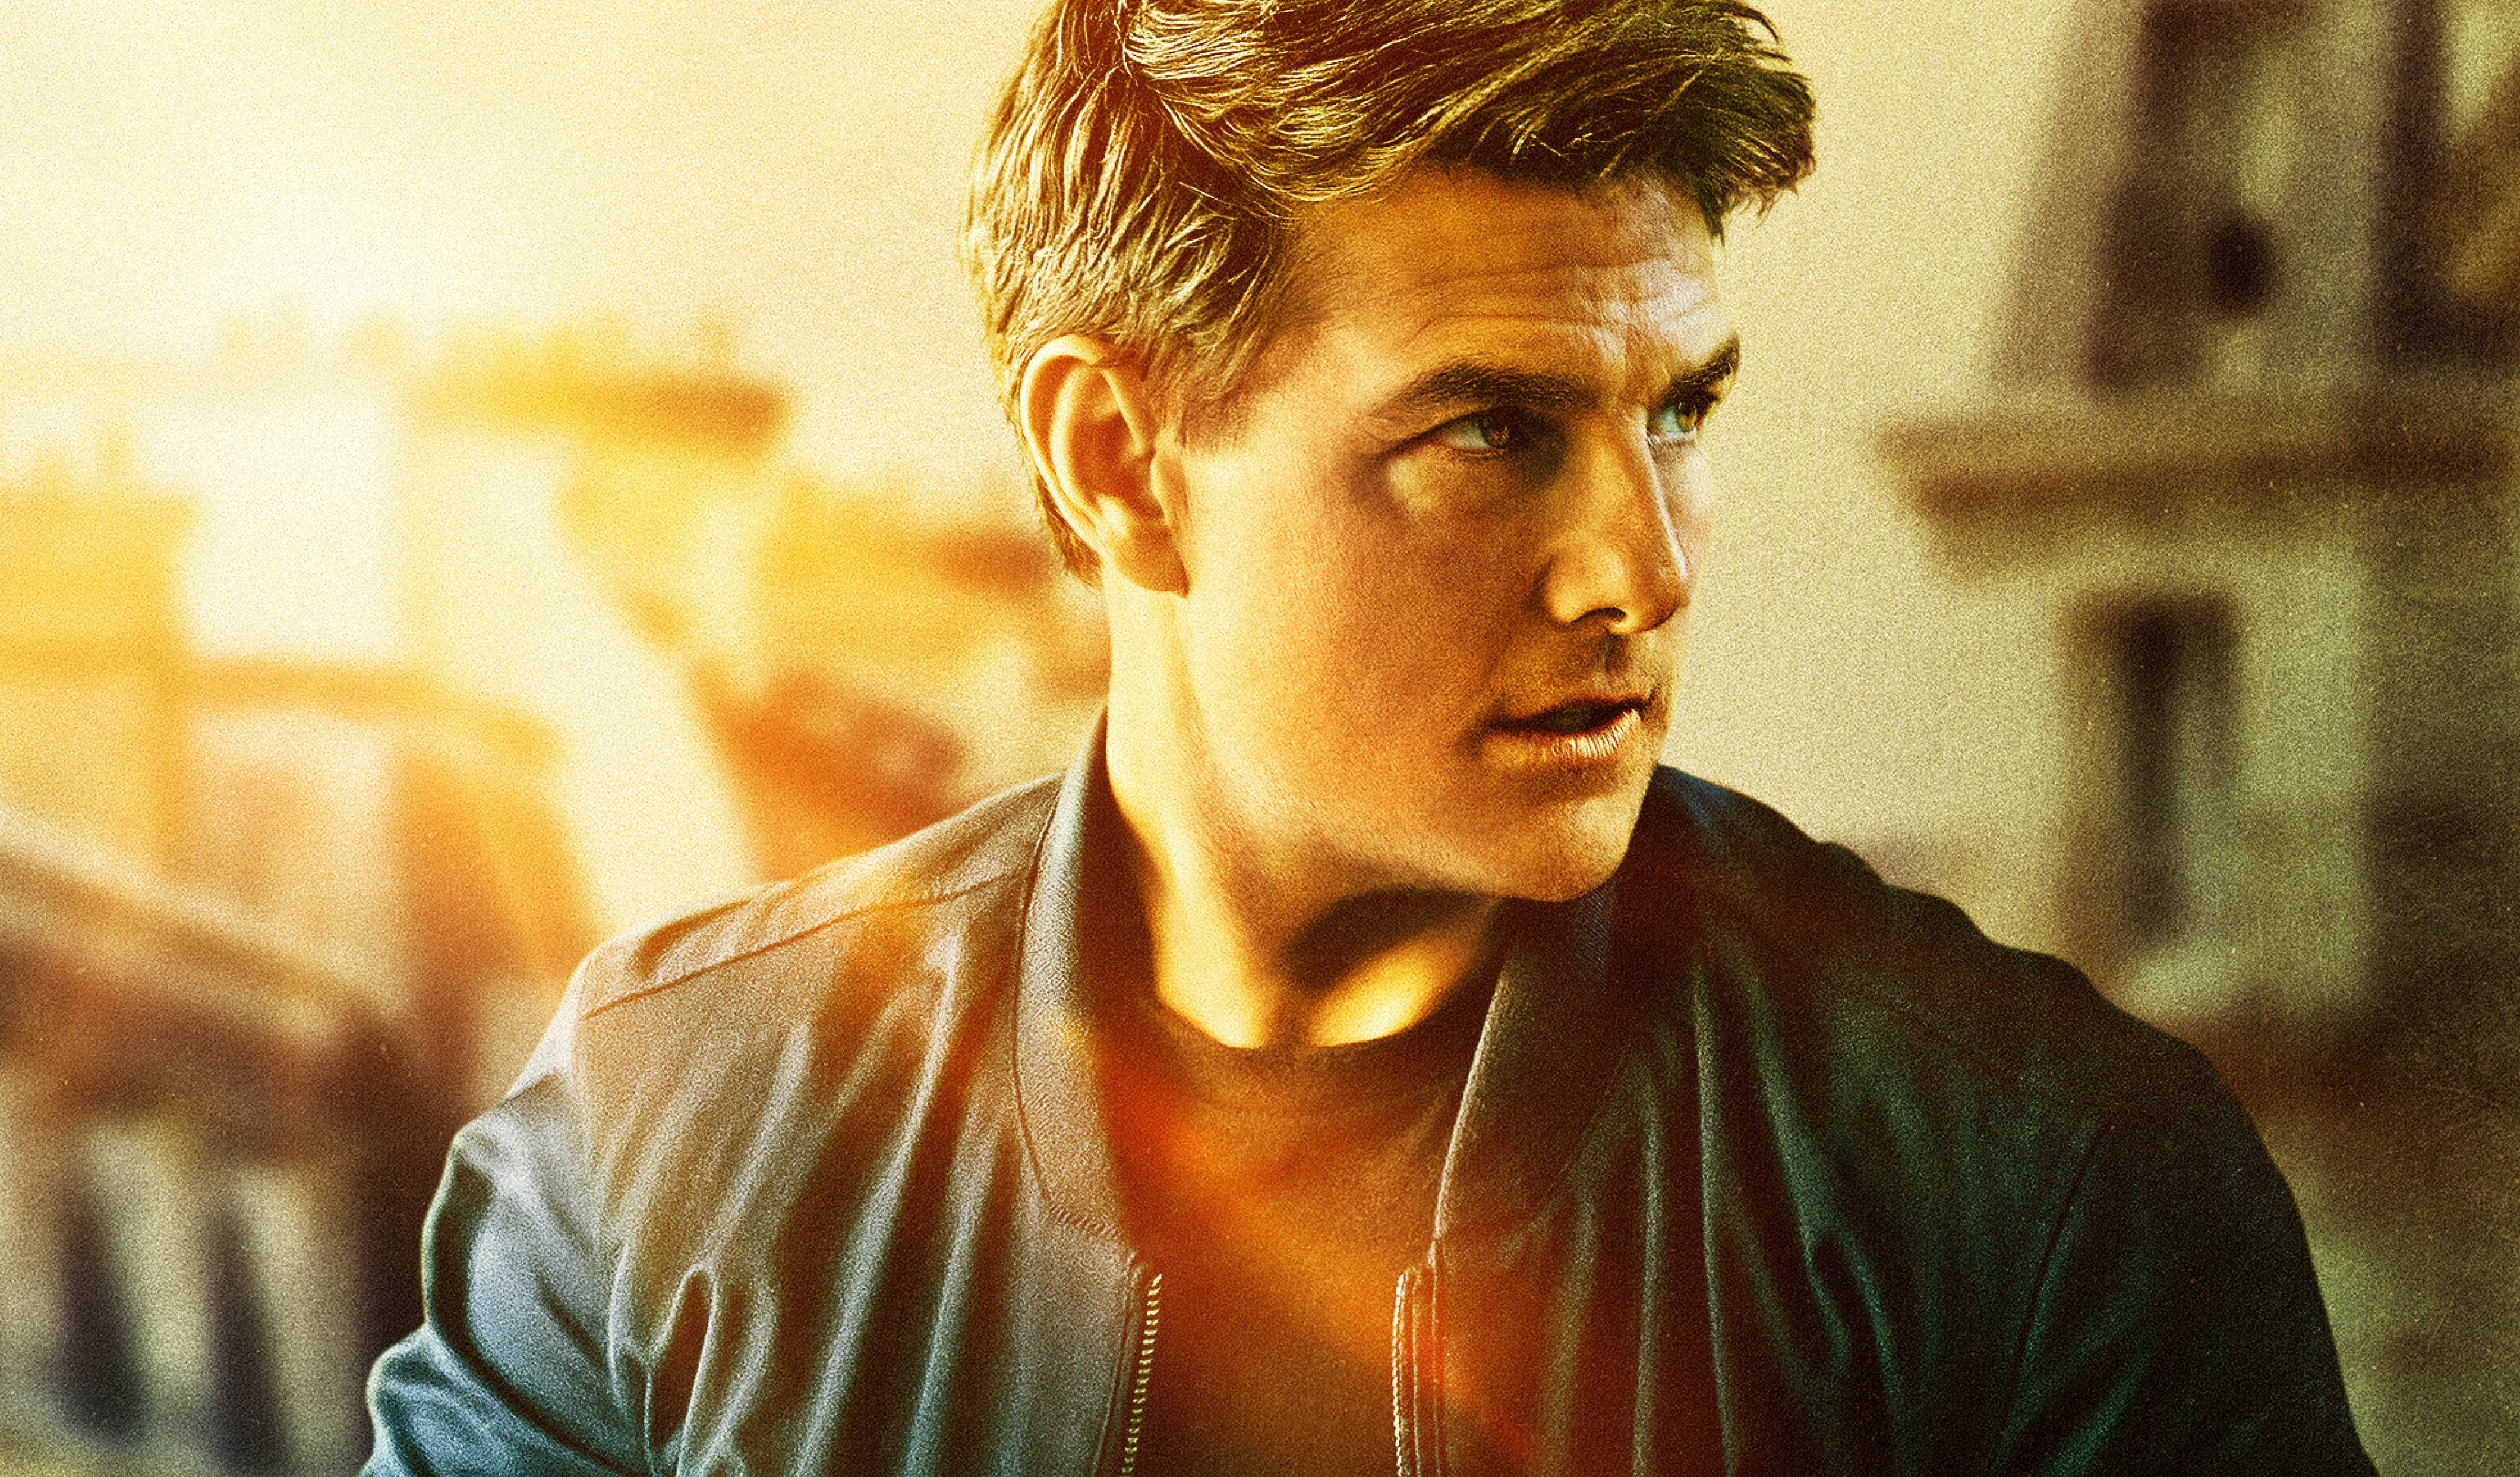 Tom Cruise From Mission Impossible Wallpaper HD Movies 4k